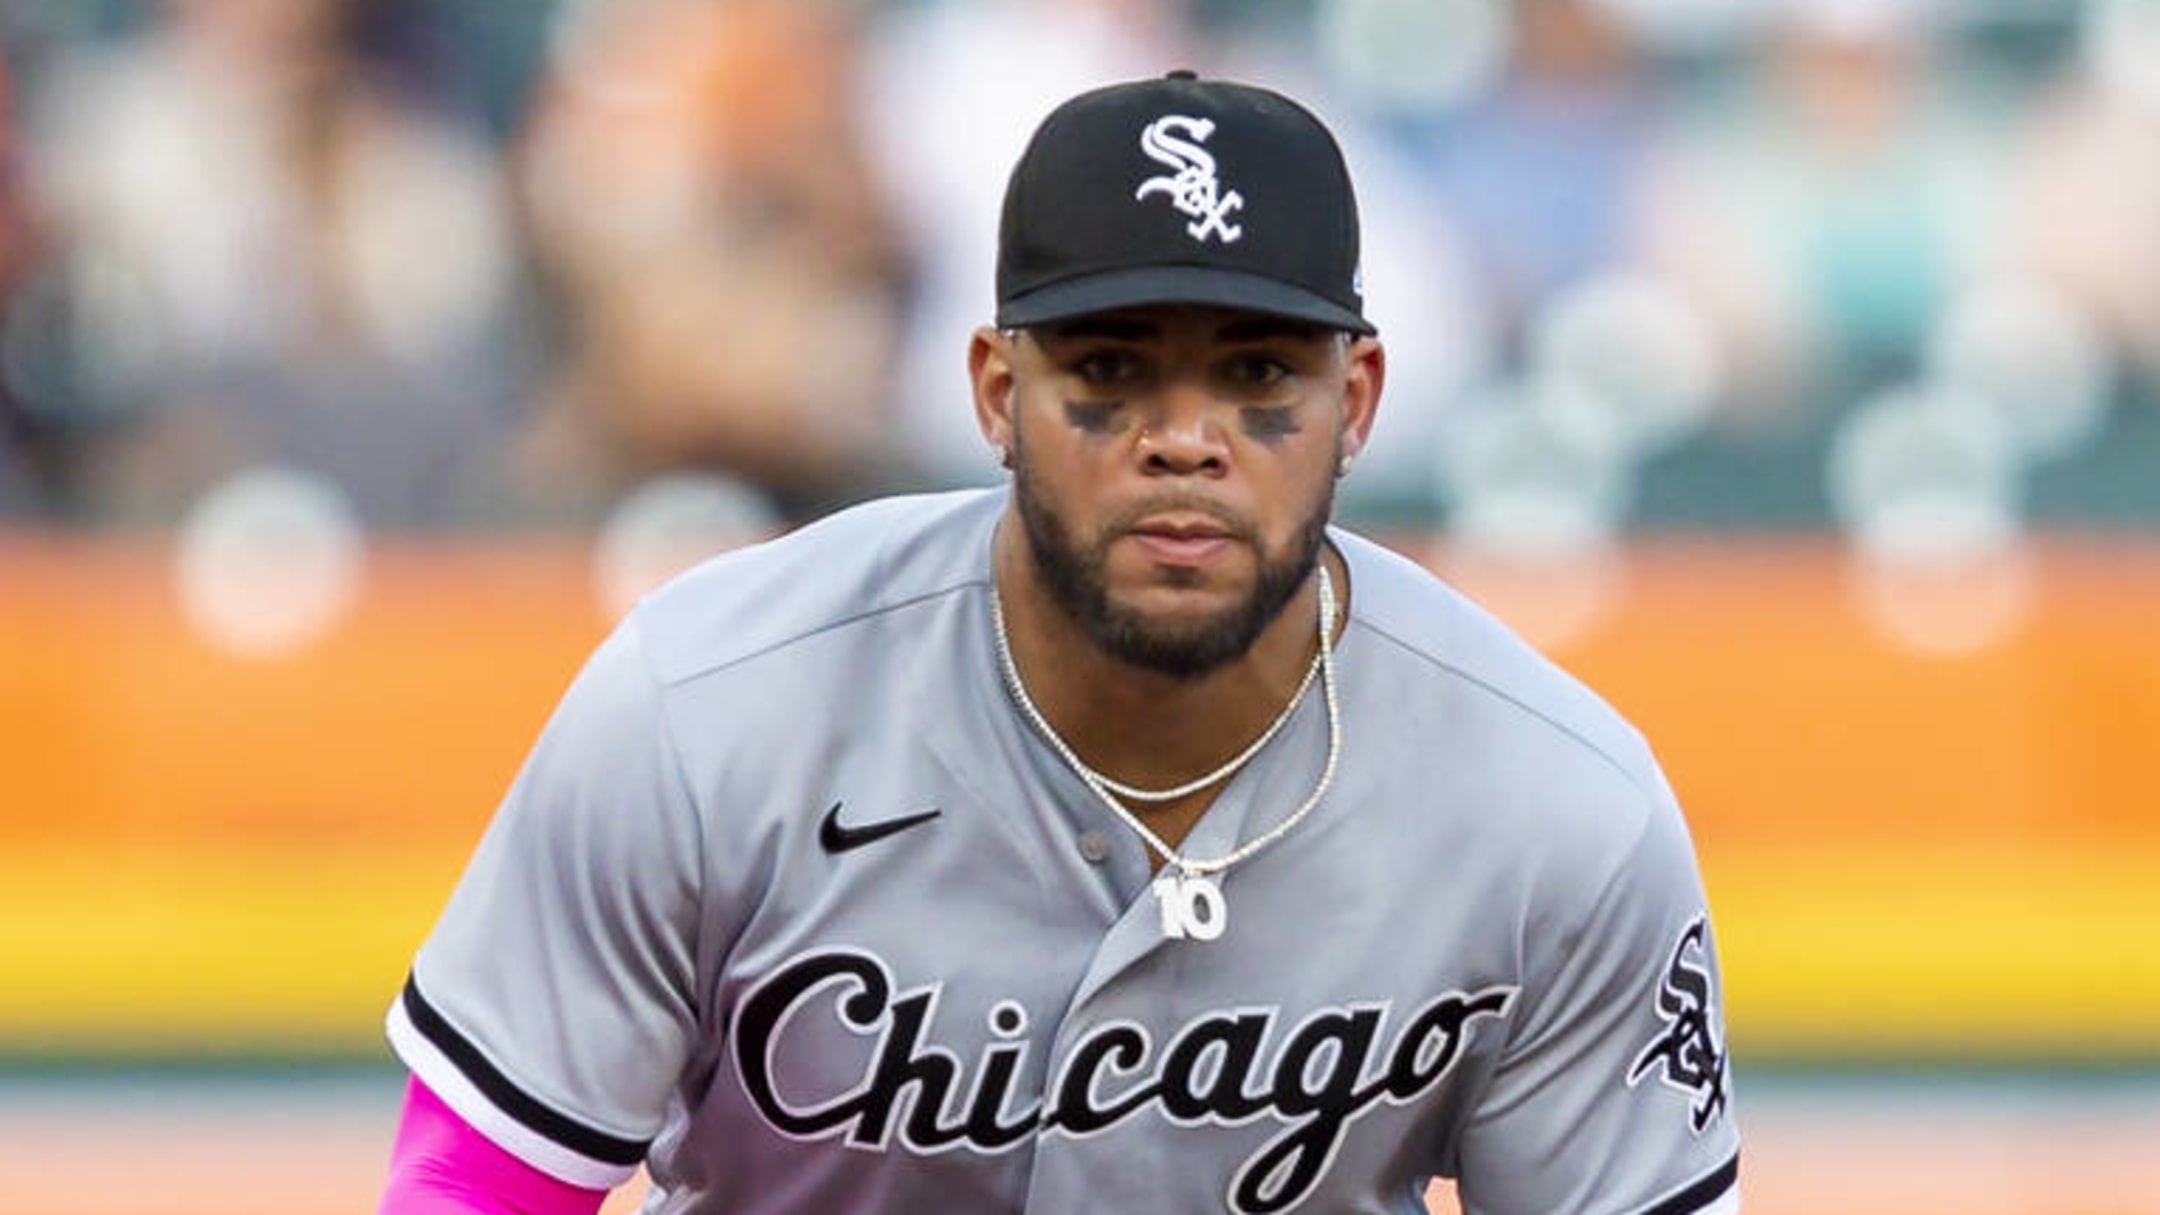 Switch-hitting Yoan Moncada finding the right stuff - Chicago Sun-Times